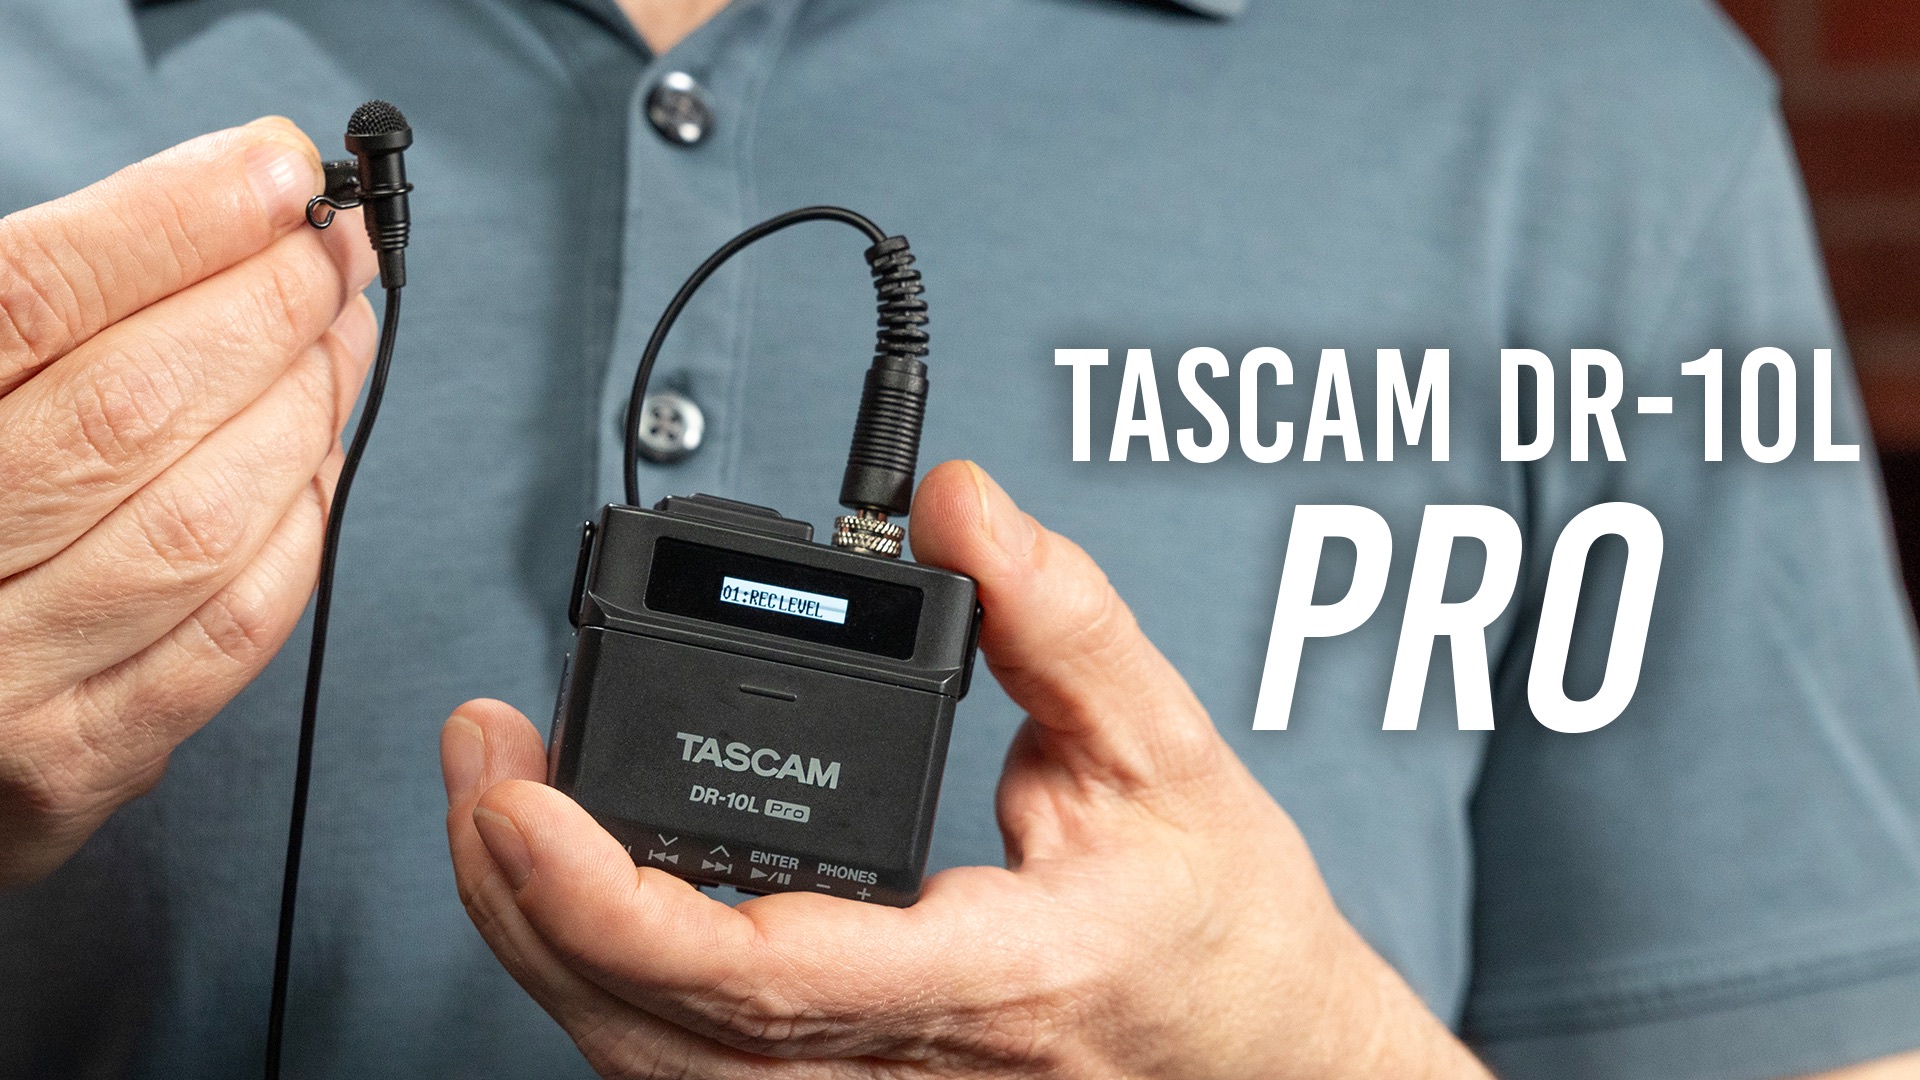 Tascam DR-10L Pro with 32-Bit Float Recording & Timecode Support